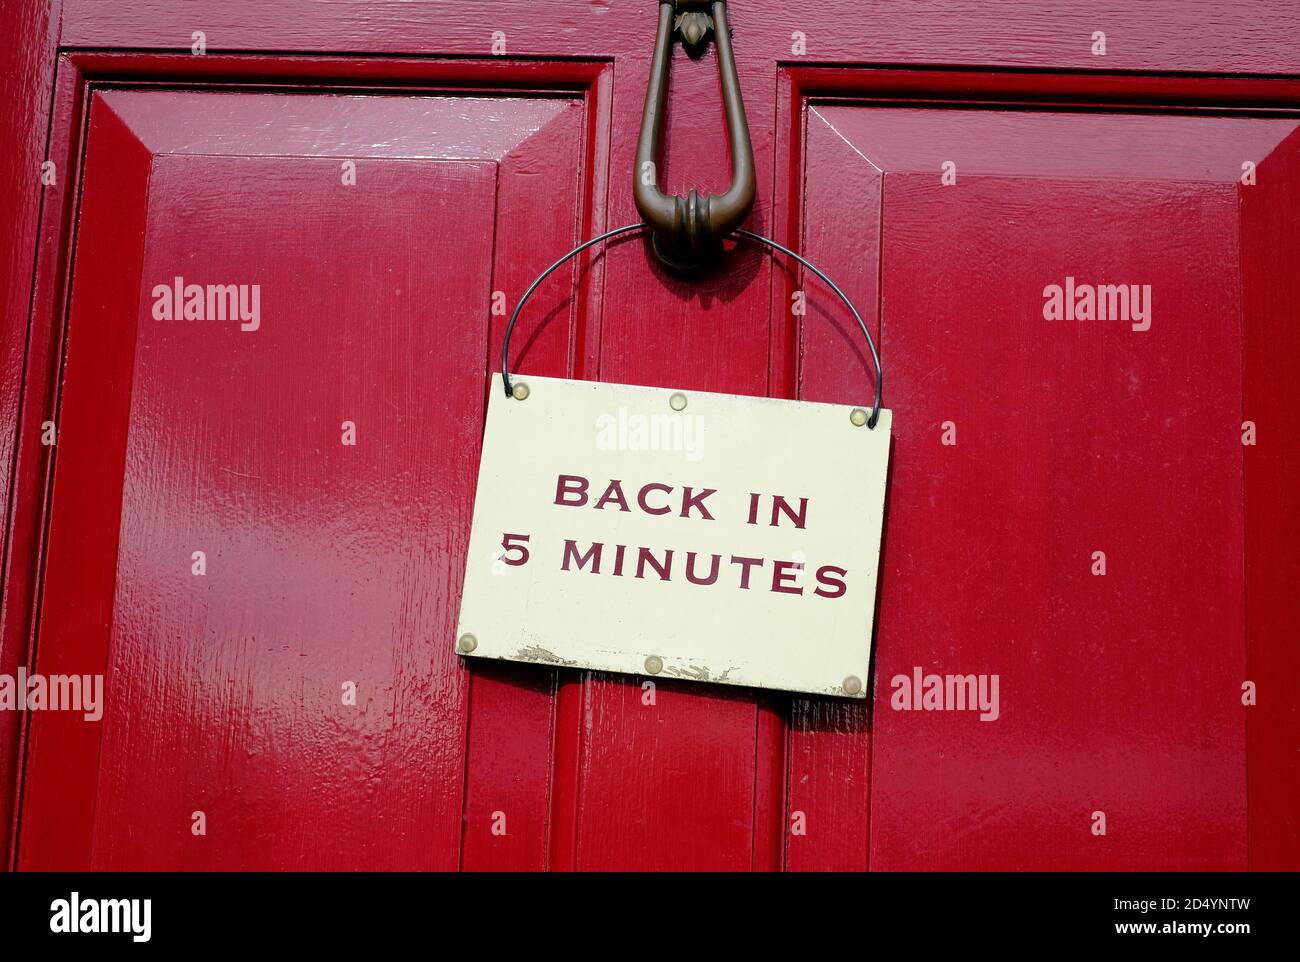 back in 5 minutes sign on red wooden door Stock Photo